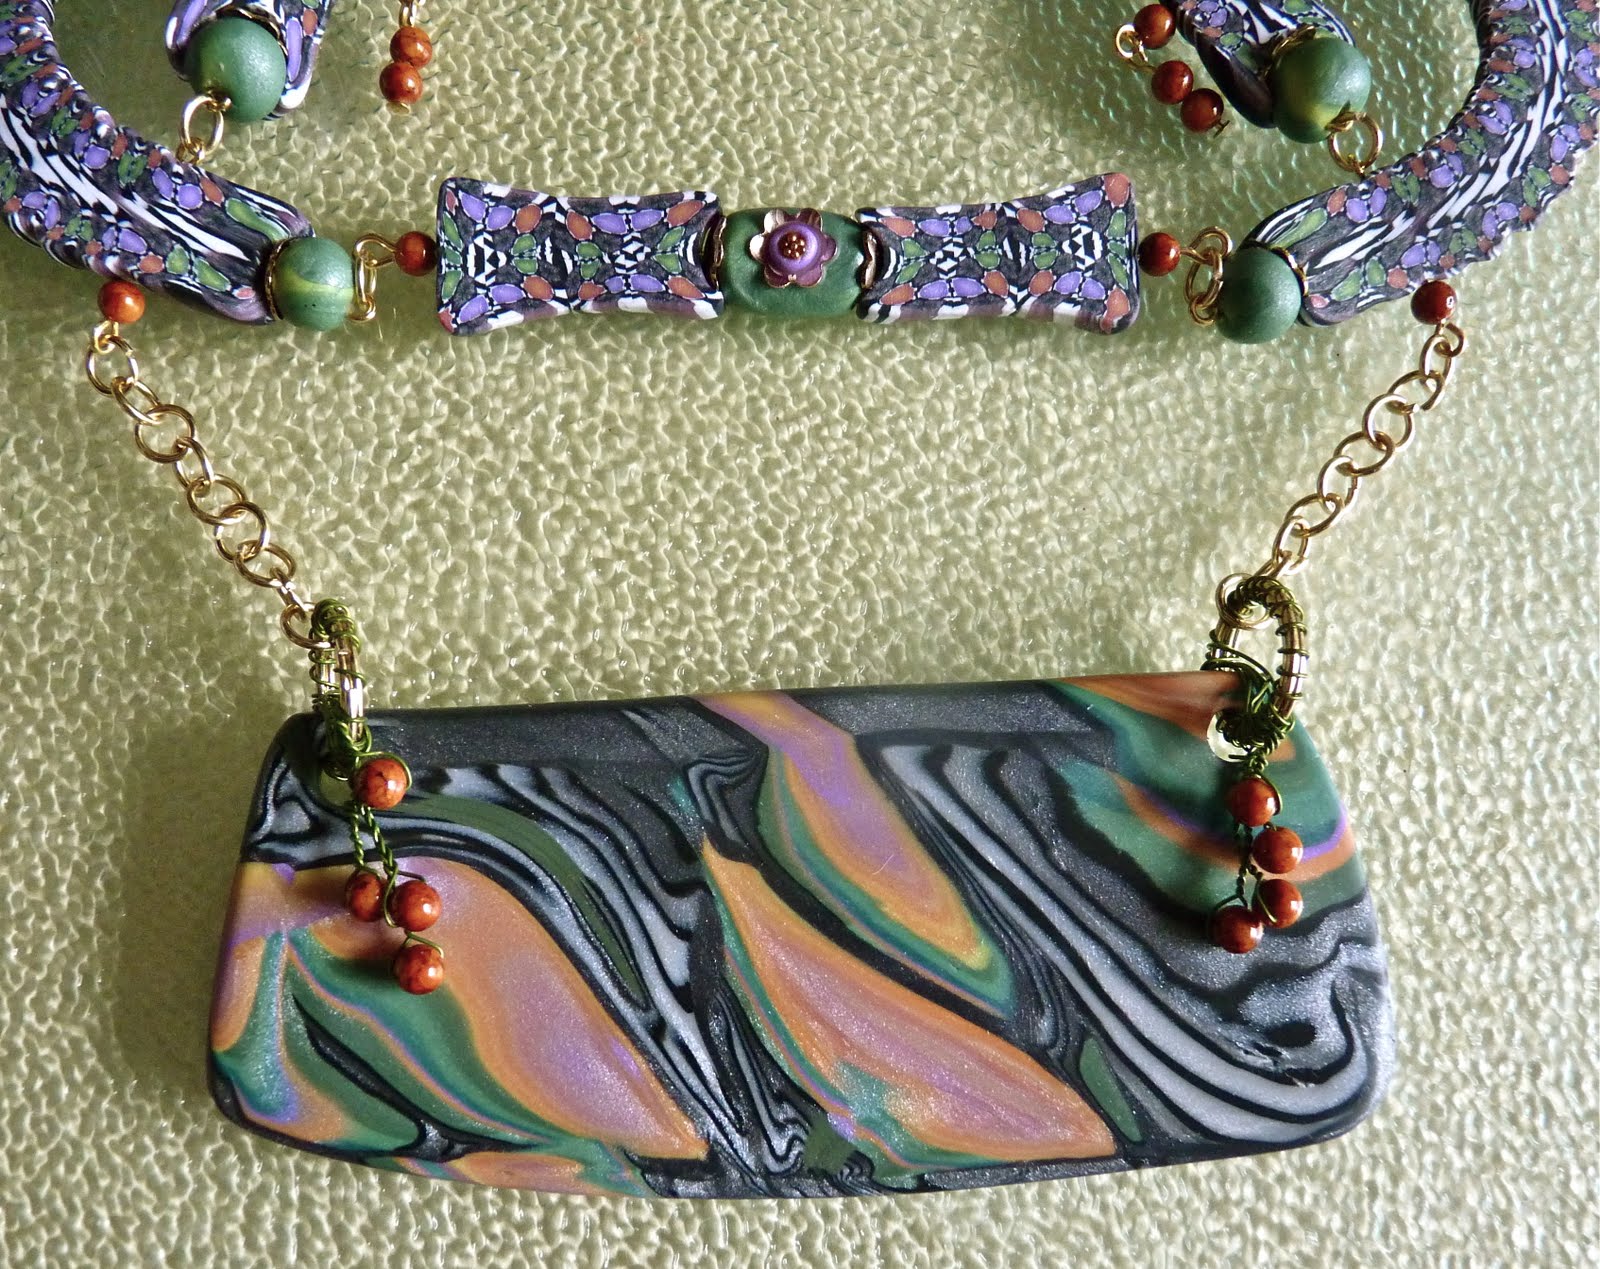 Knightwork: Playing with Clay: Caterpillar Necklace & Mixed Media Fish